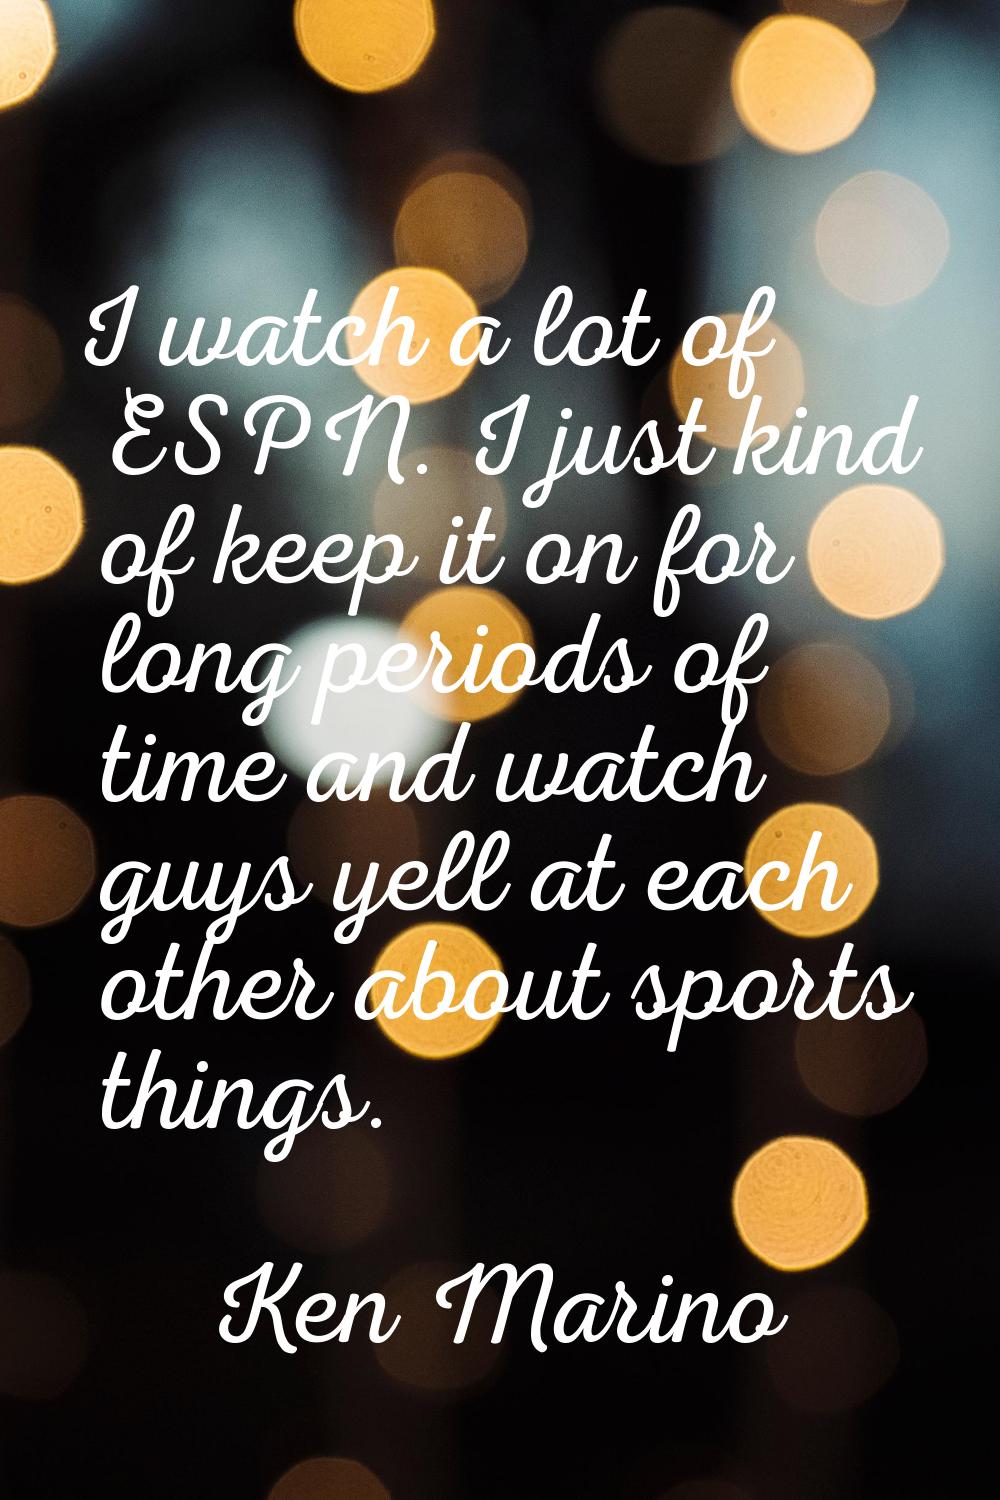 I watch a lot of ESPN. I just kind of keep it on for long periods of time and watch guys yell at ea